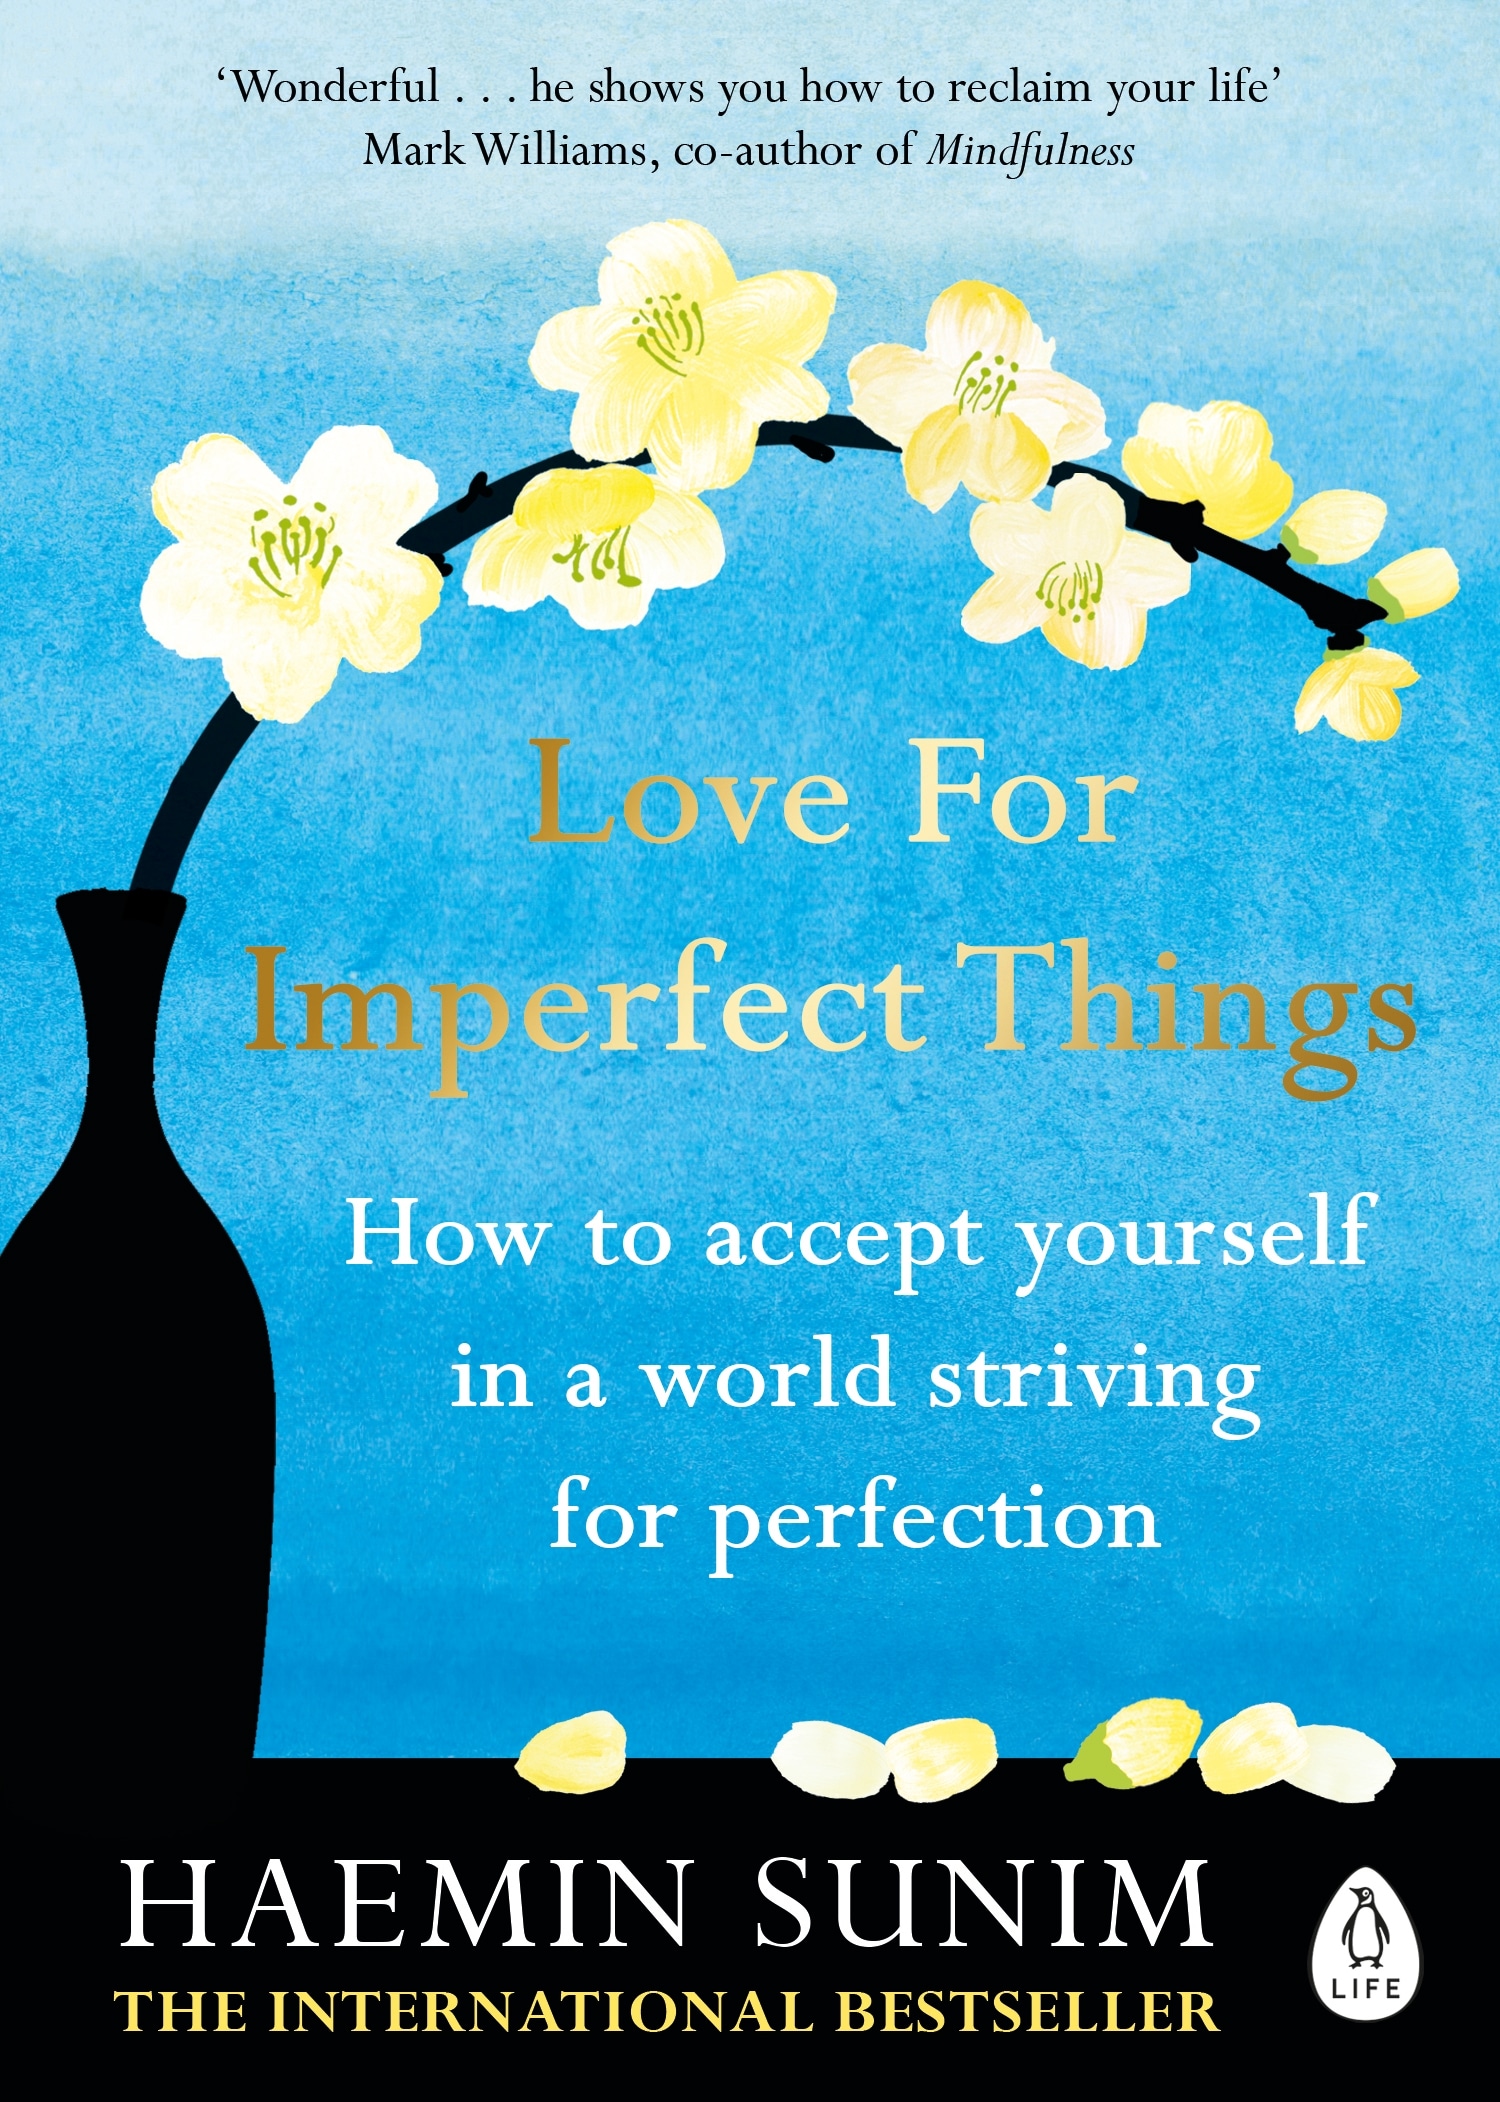 Book “Love for Imperfect Things” by Haemin Sunim — February 13, 2020